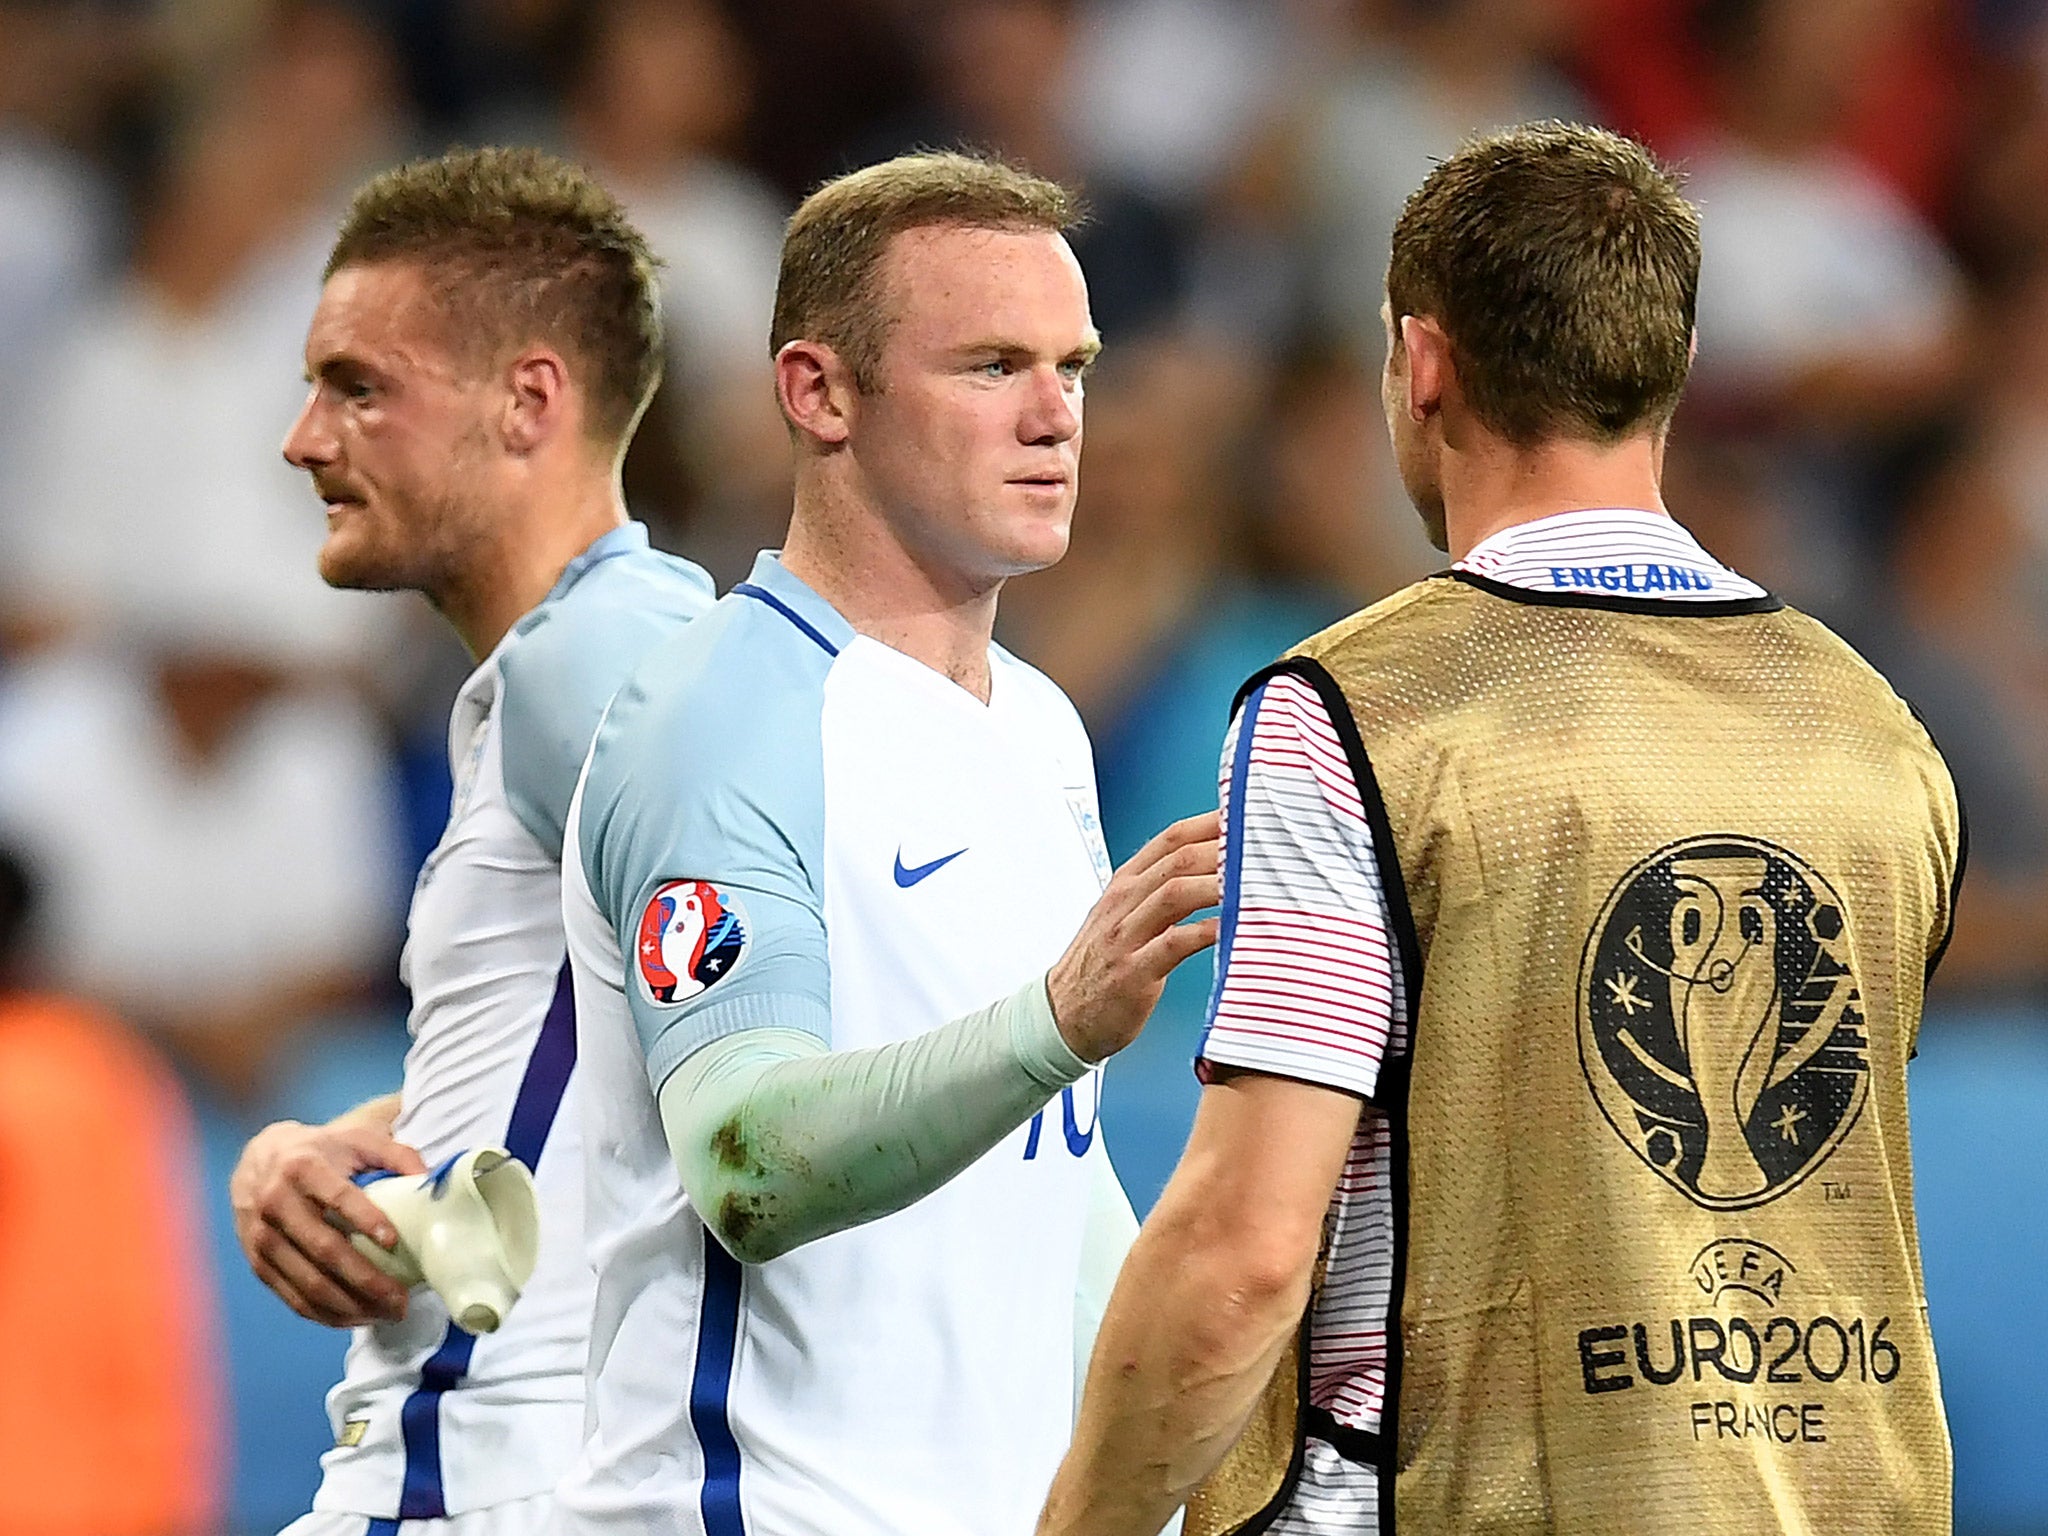 England suffered the worst defeat in their history in the 2-1 loss to Iceland